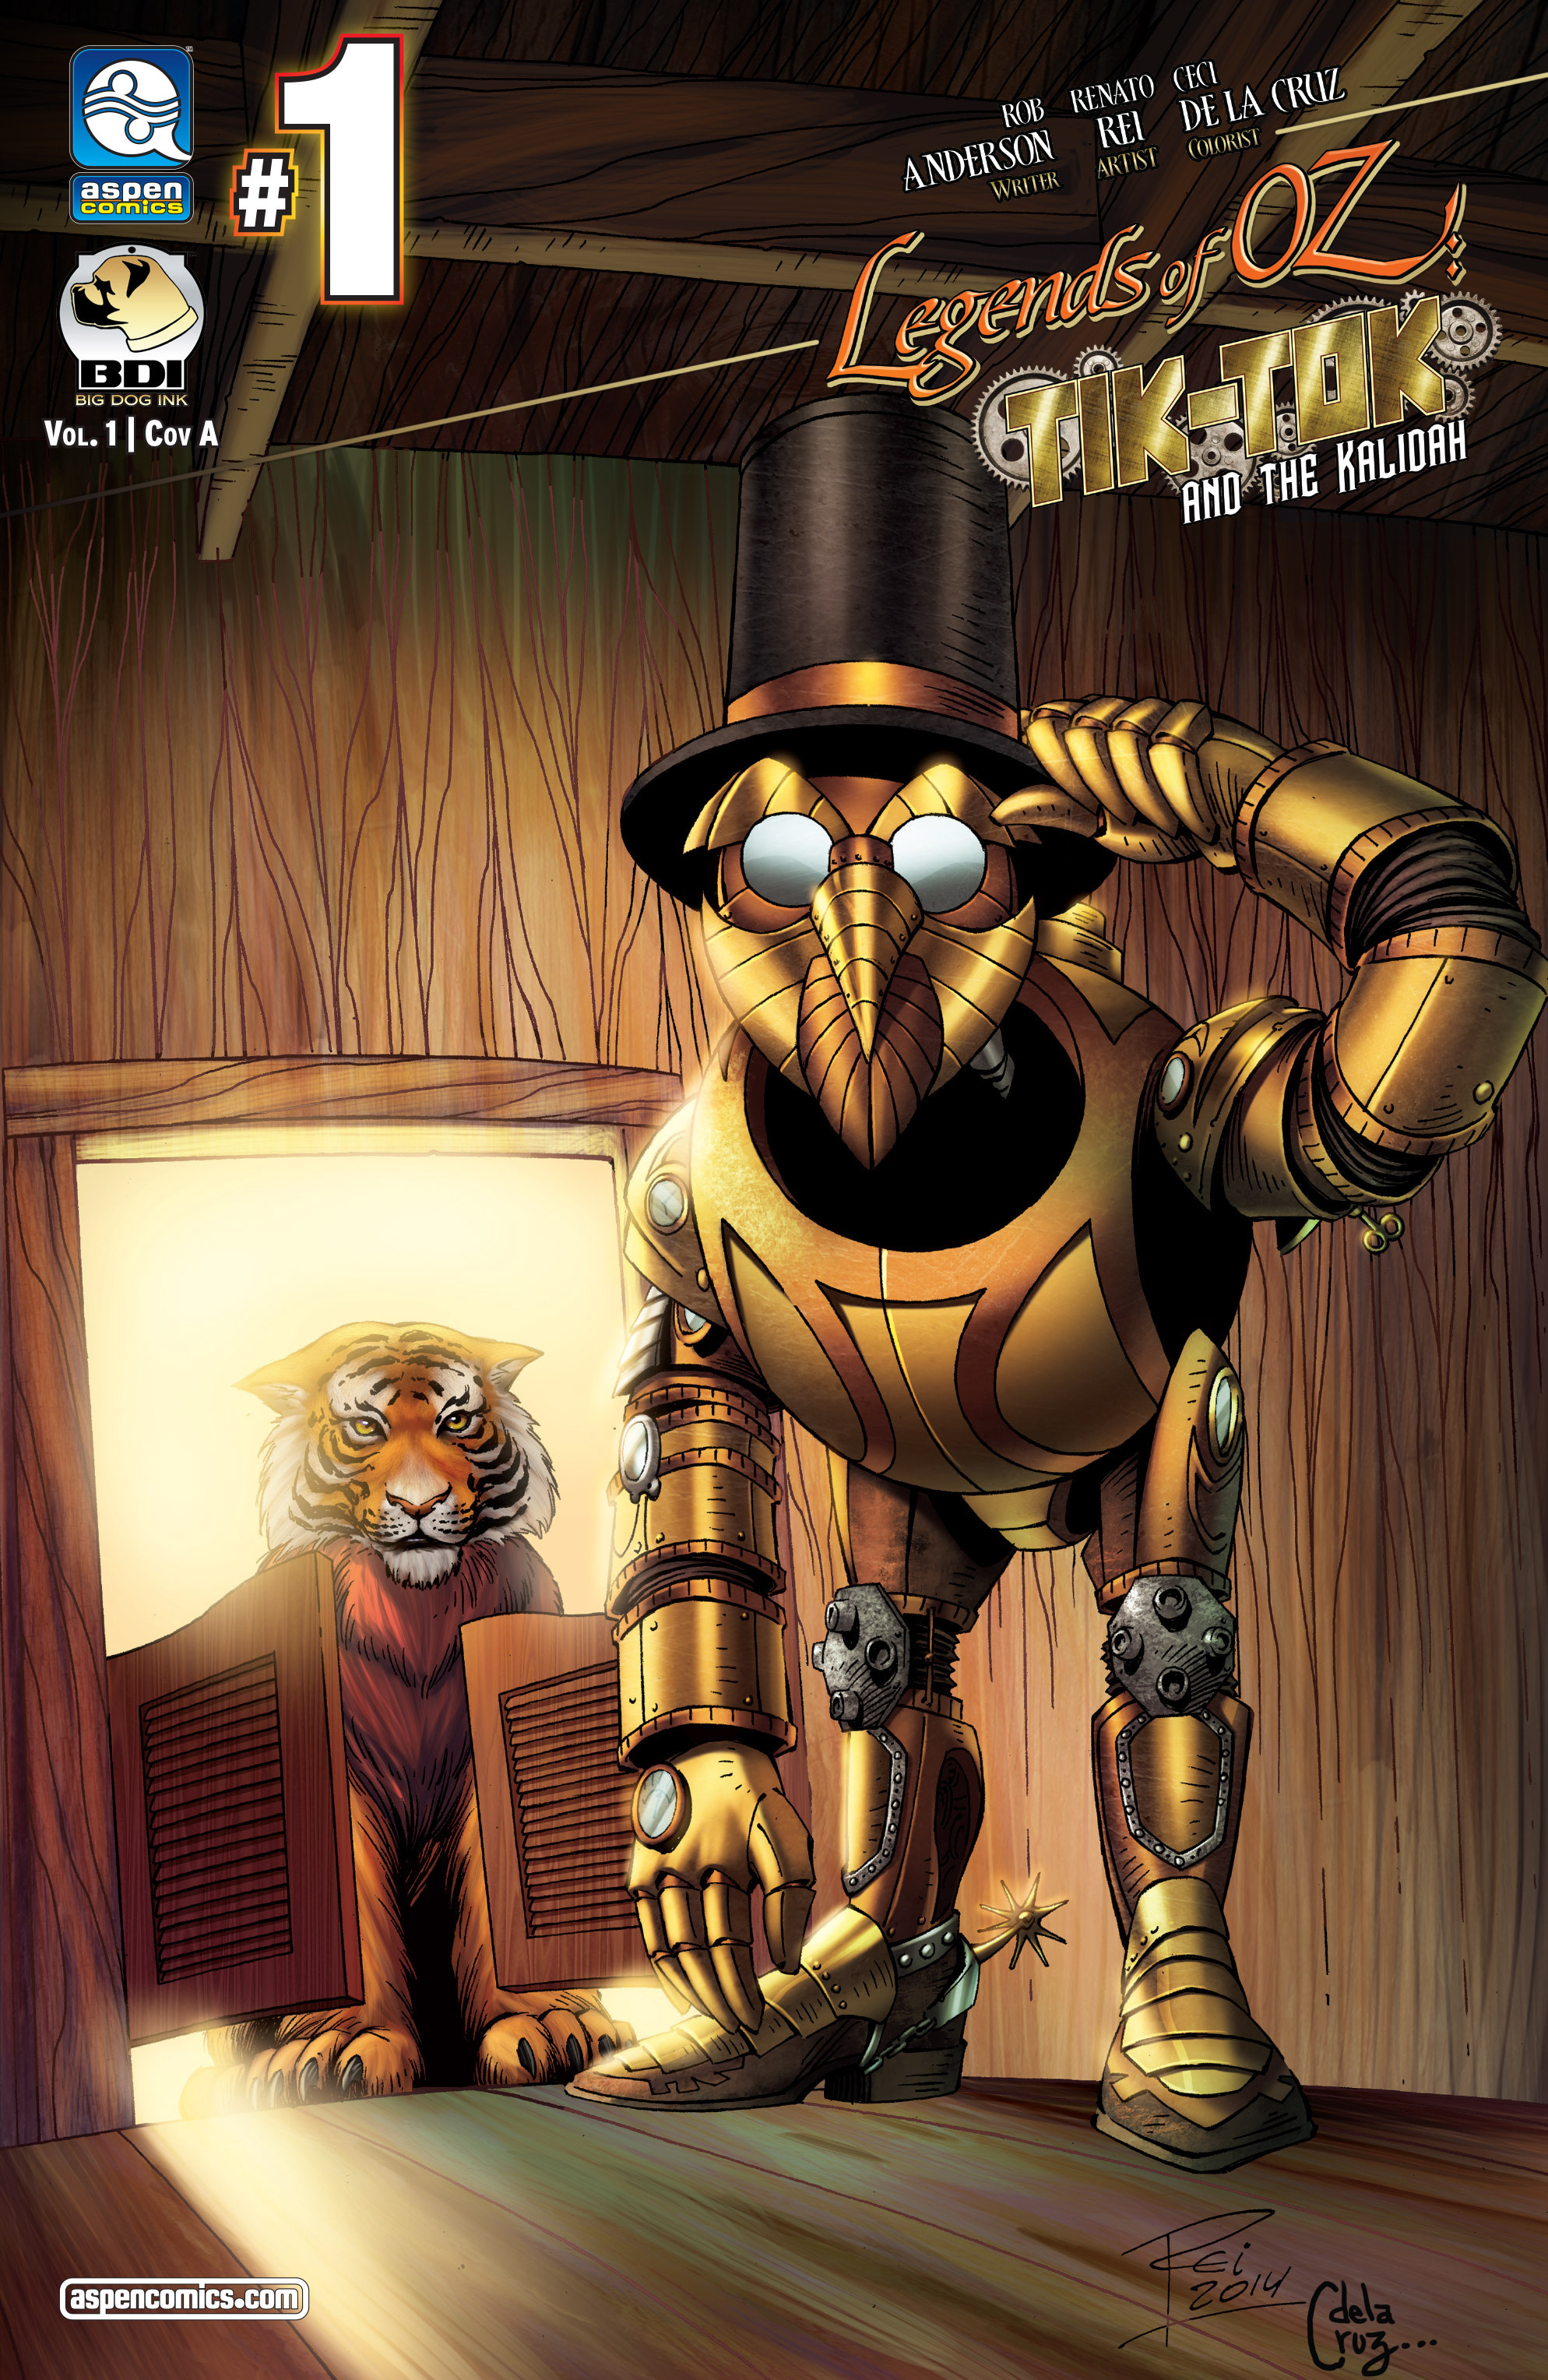 Read online Legends of Oz: Tik-Tok and the Kalidah comic -  Issue #1 - 1